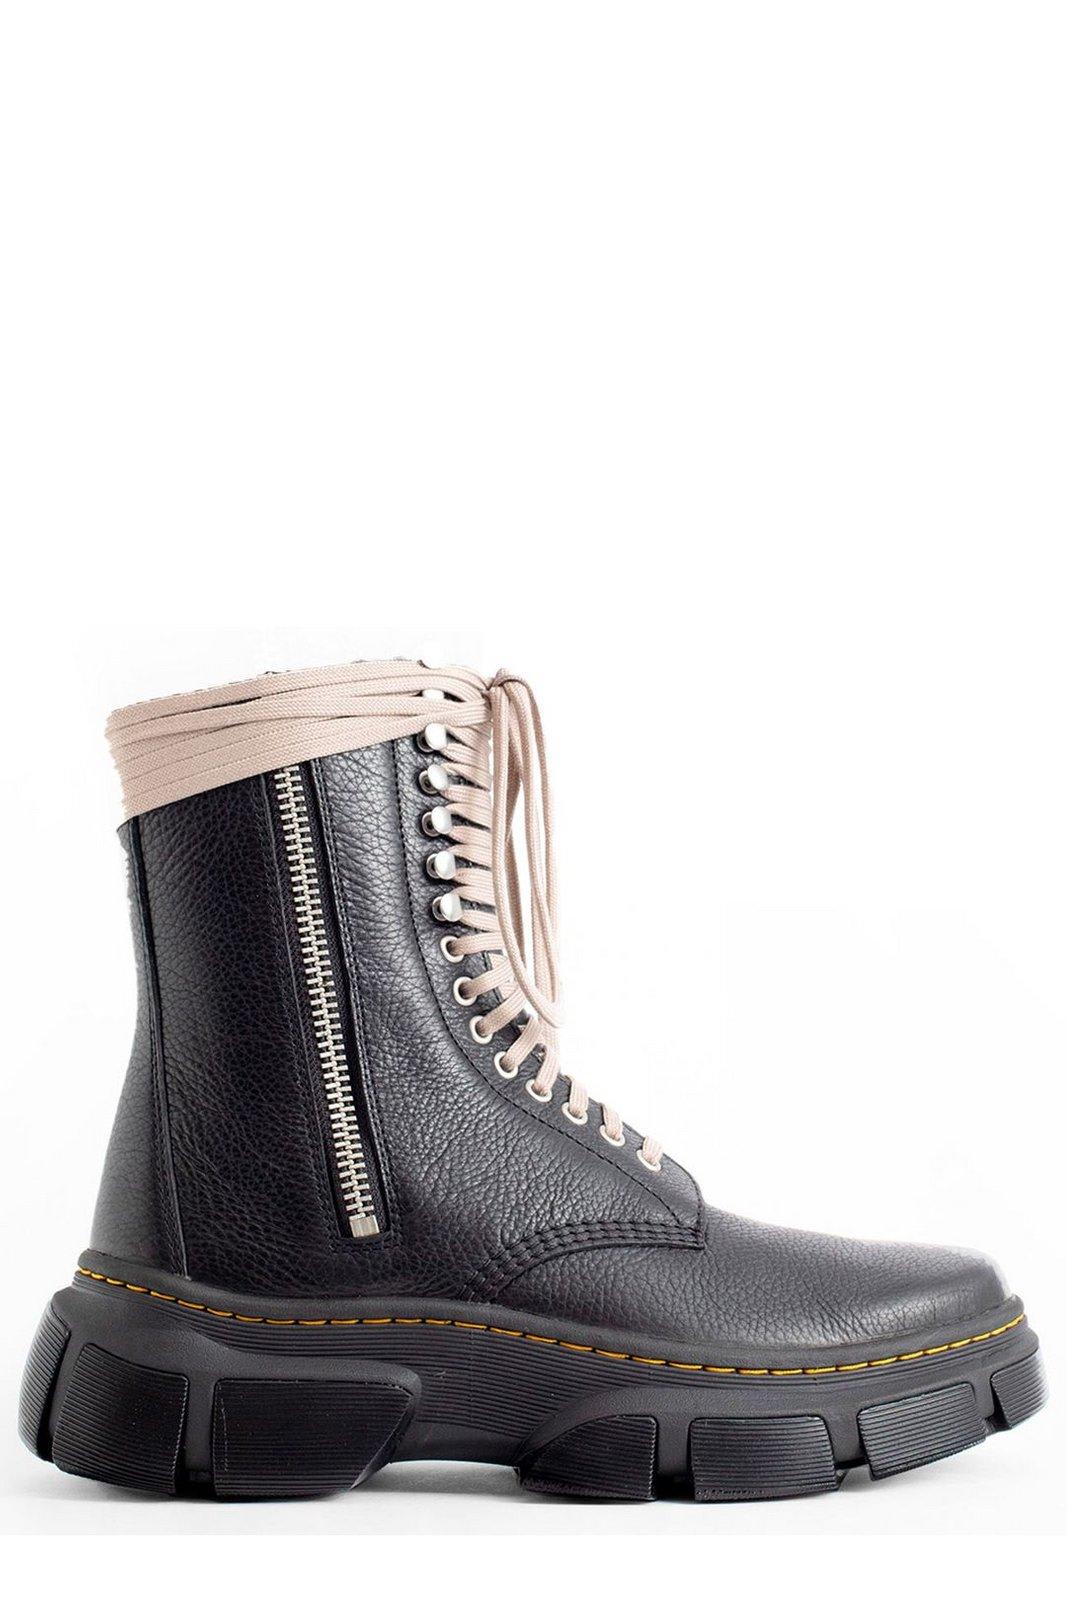 RICK OWENS CHUNKY SOLE LACE-UP BOOTS